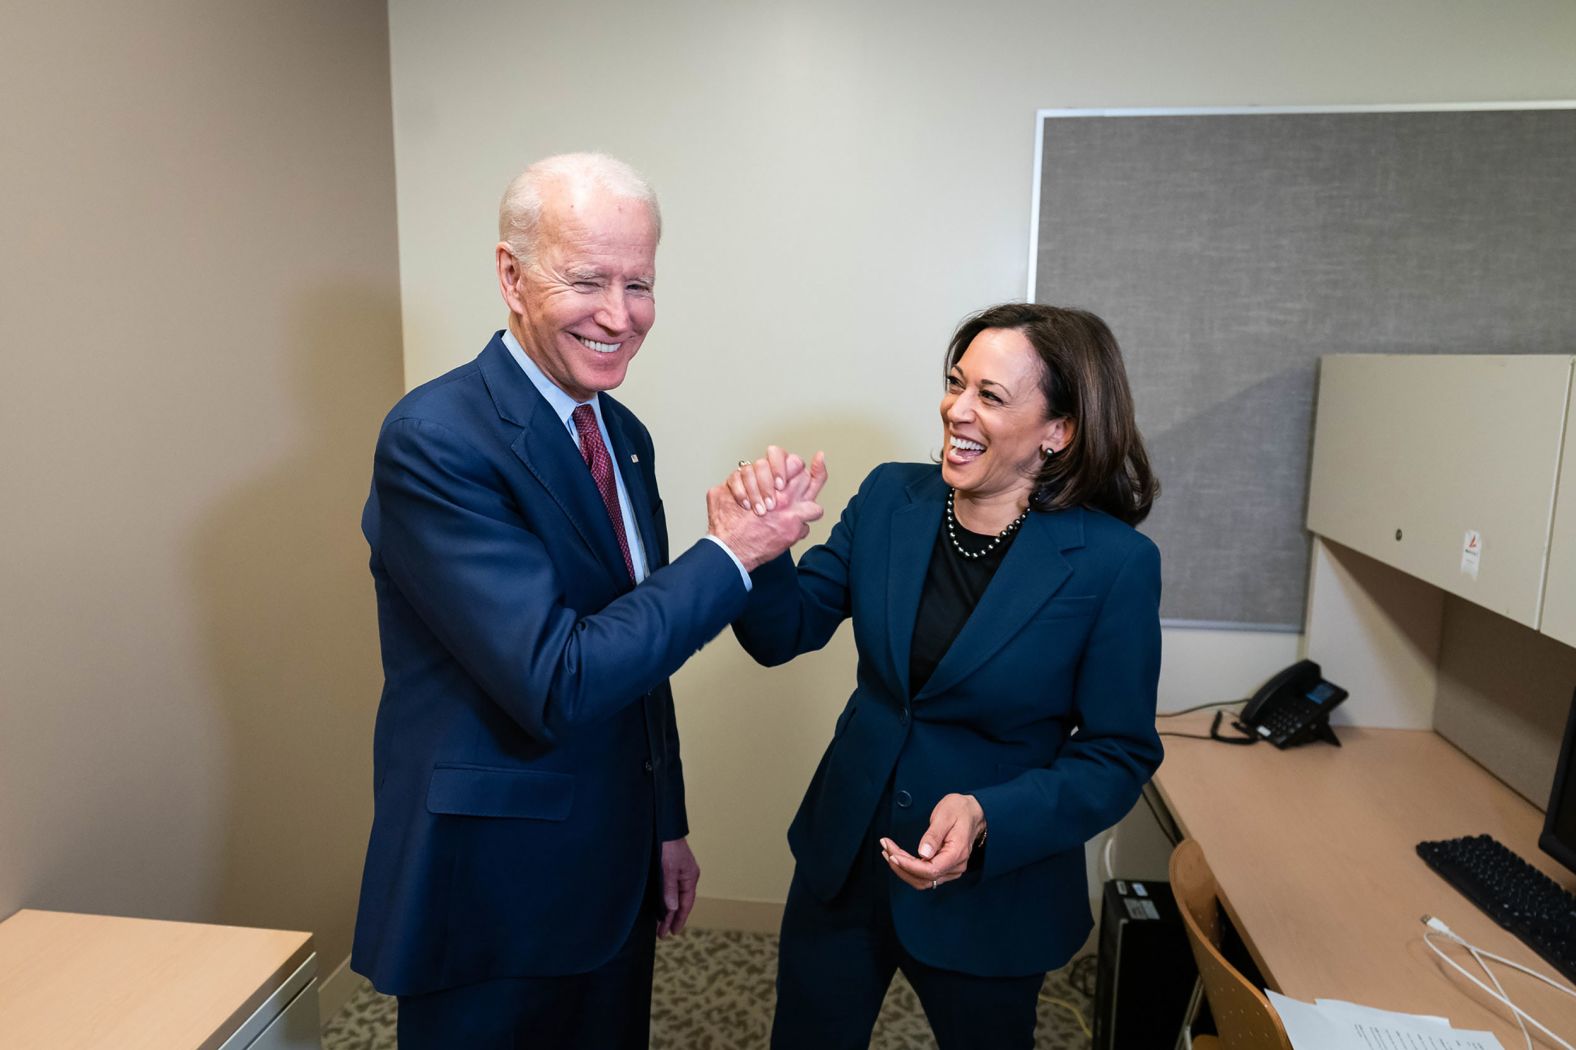 Biden and US Sen. Kamala Harris greet each other at a Detroit high school as they attend a "Get Out the Vote" event in March 2020. Harris had dropped out of the presidential race a few months earlier.